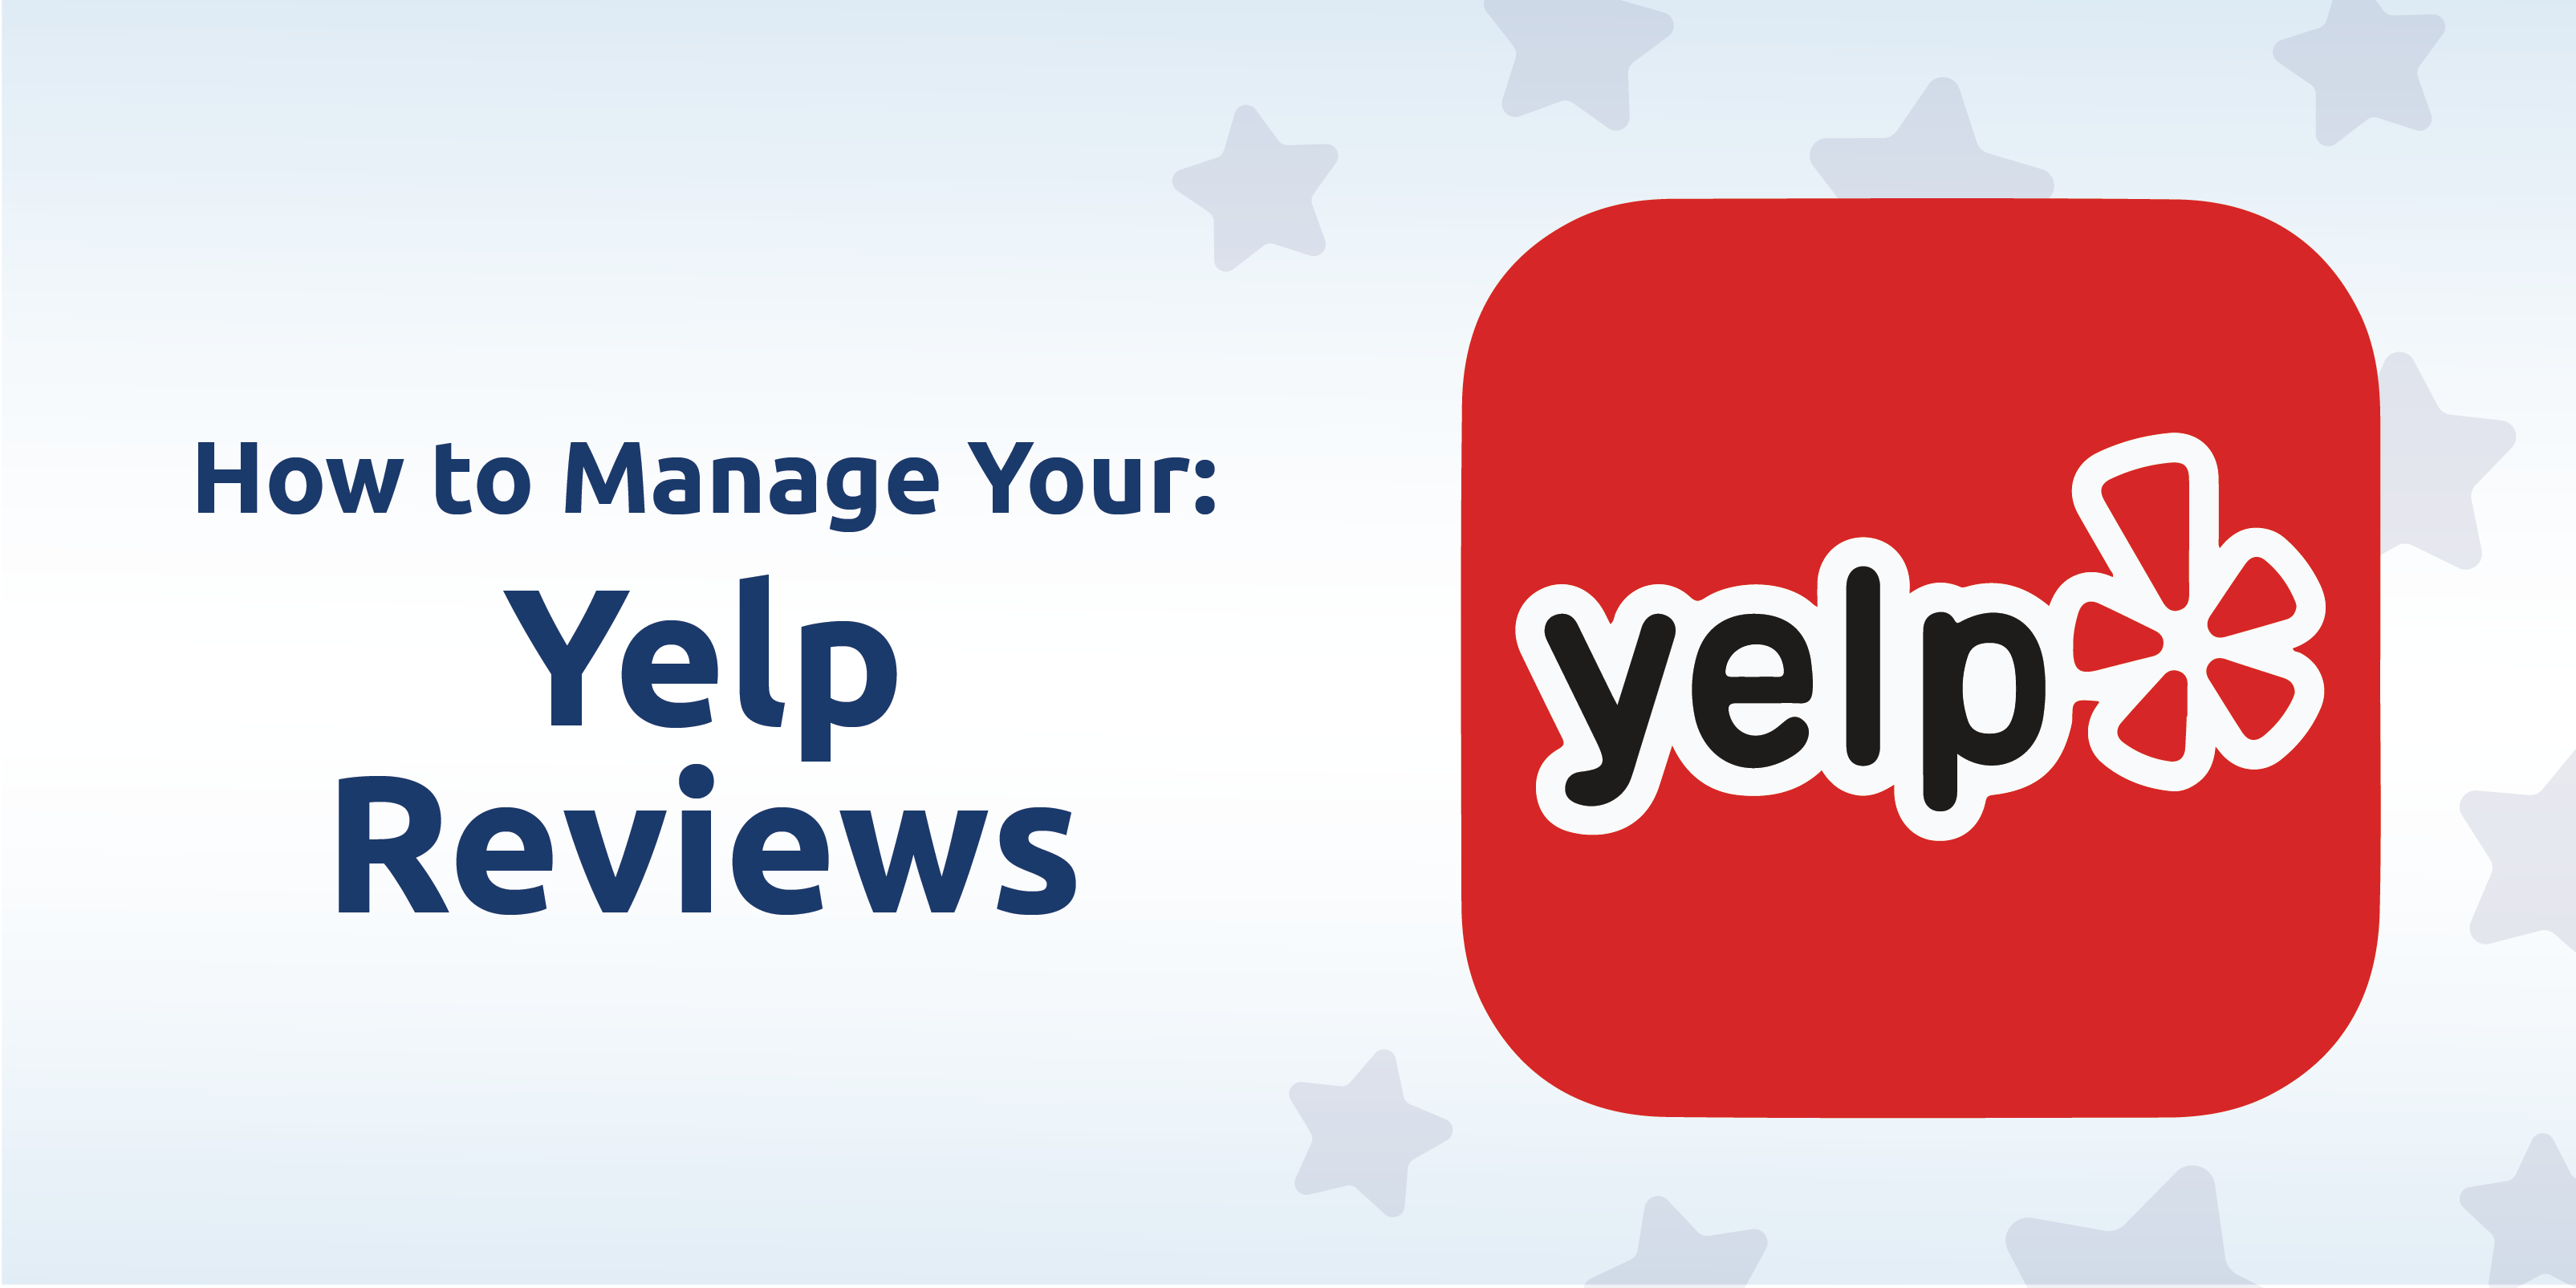 How to Manage Yelp Reviews